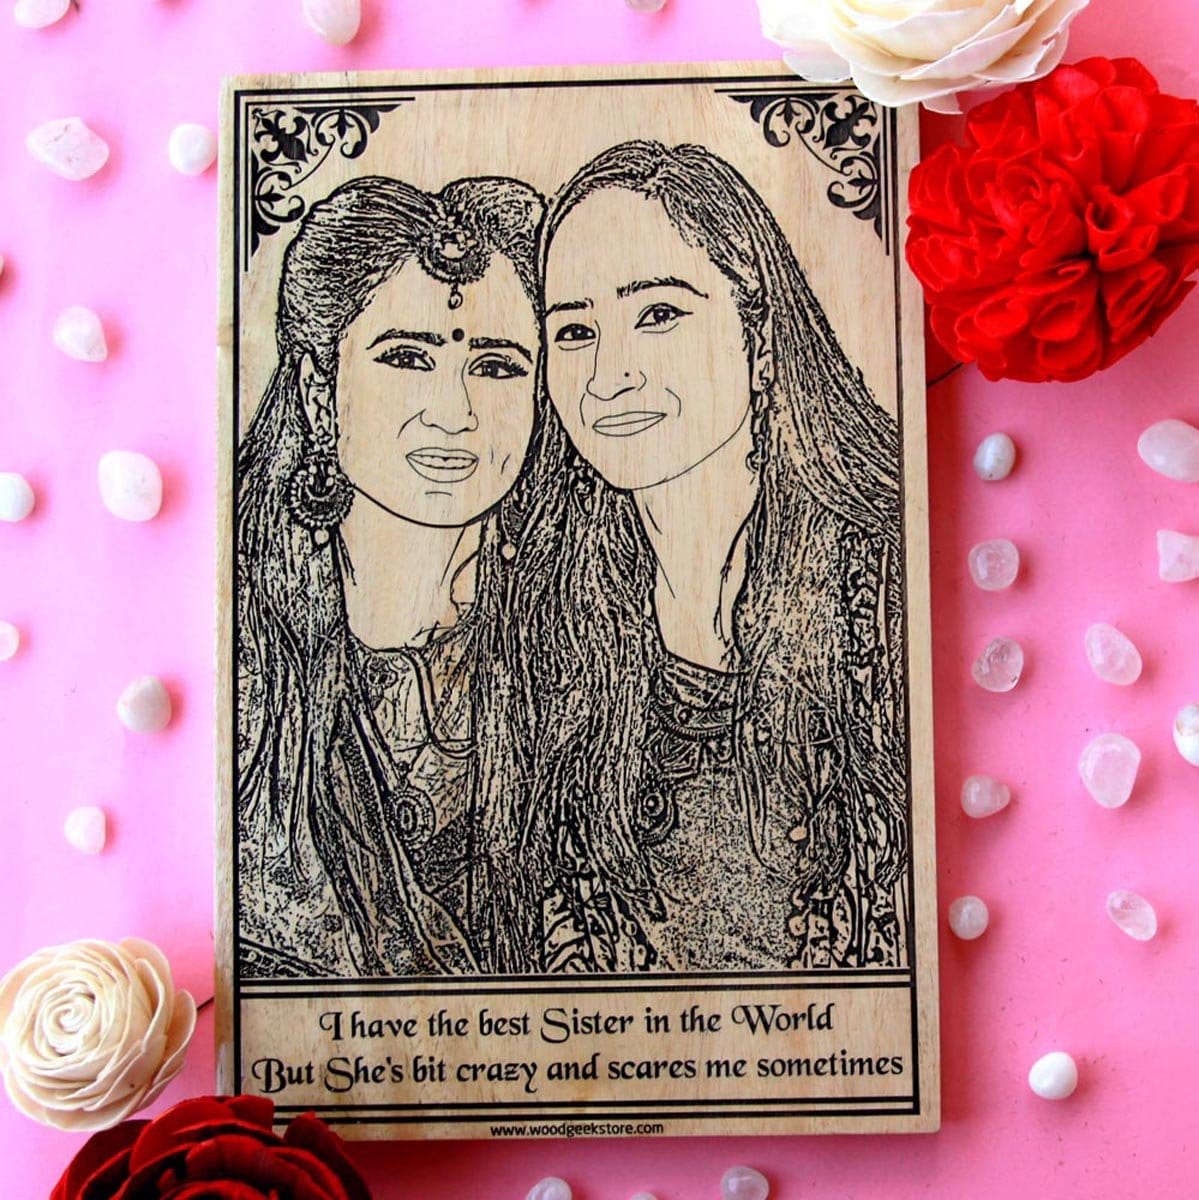 I have the best sister in the world. But she's a bit crazy and scares me sometimes.  Looking for Rakhi gifts for sister or birthday gifts for sister? This wood engraved photo is the best gift for her.